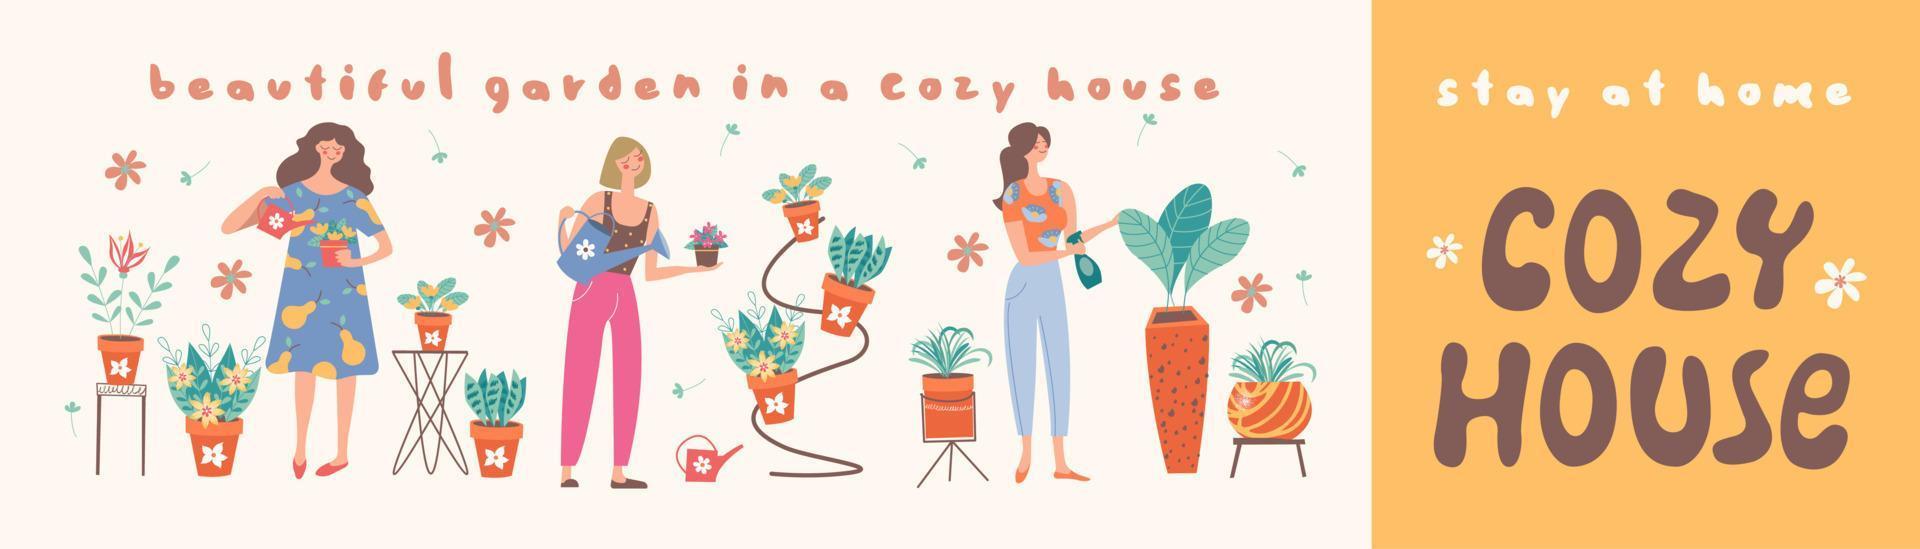 Stay at home. Create a home garden. Vector illustration.